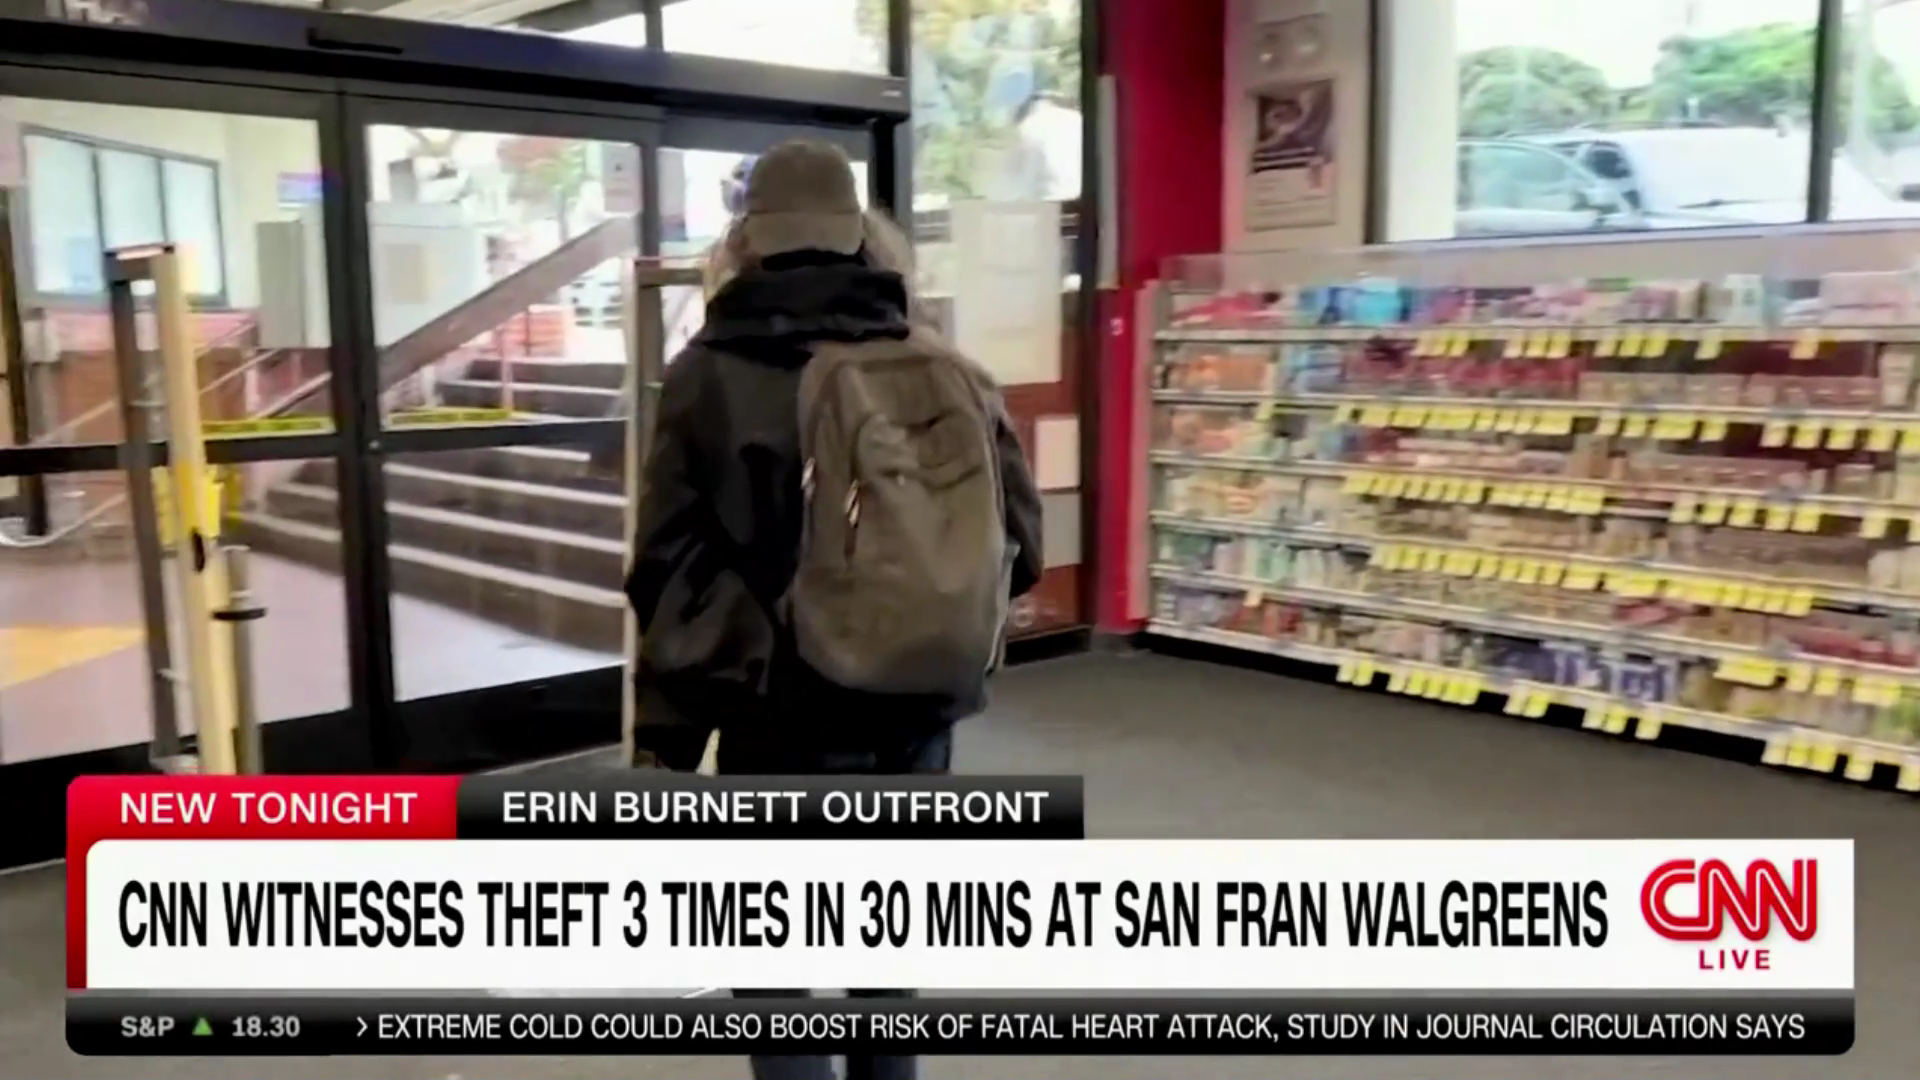 News crew in San Francisco watches live as man brazenly steals from a Walgreens: 'Did that guy pay?'